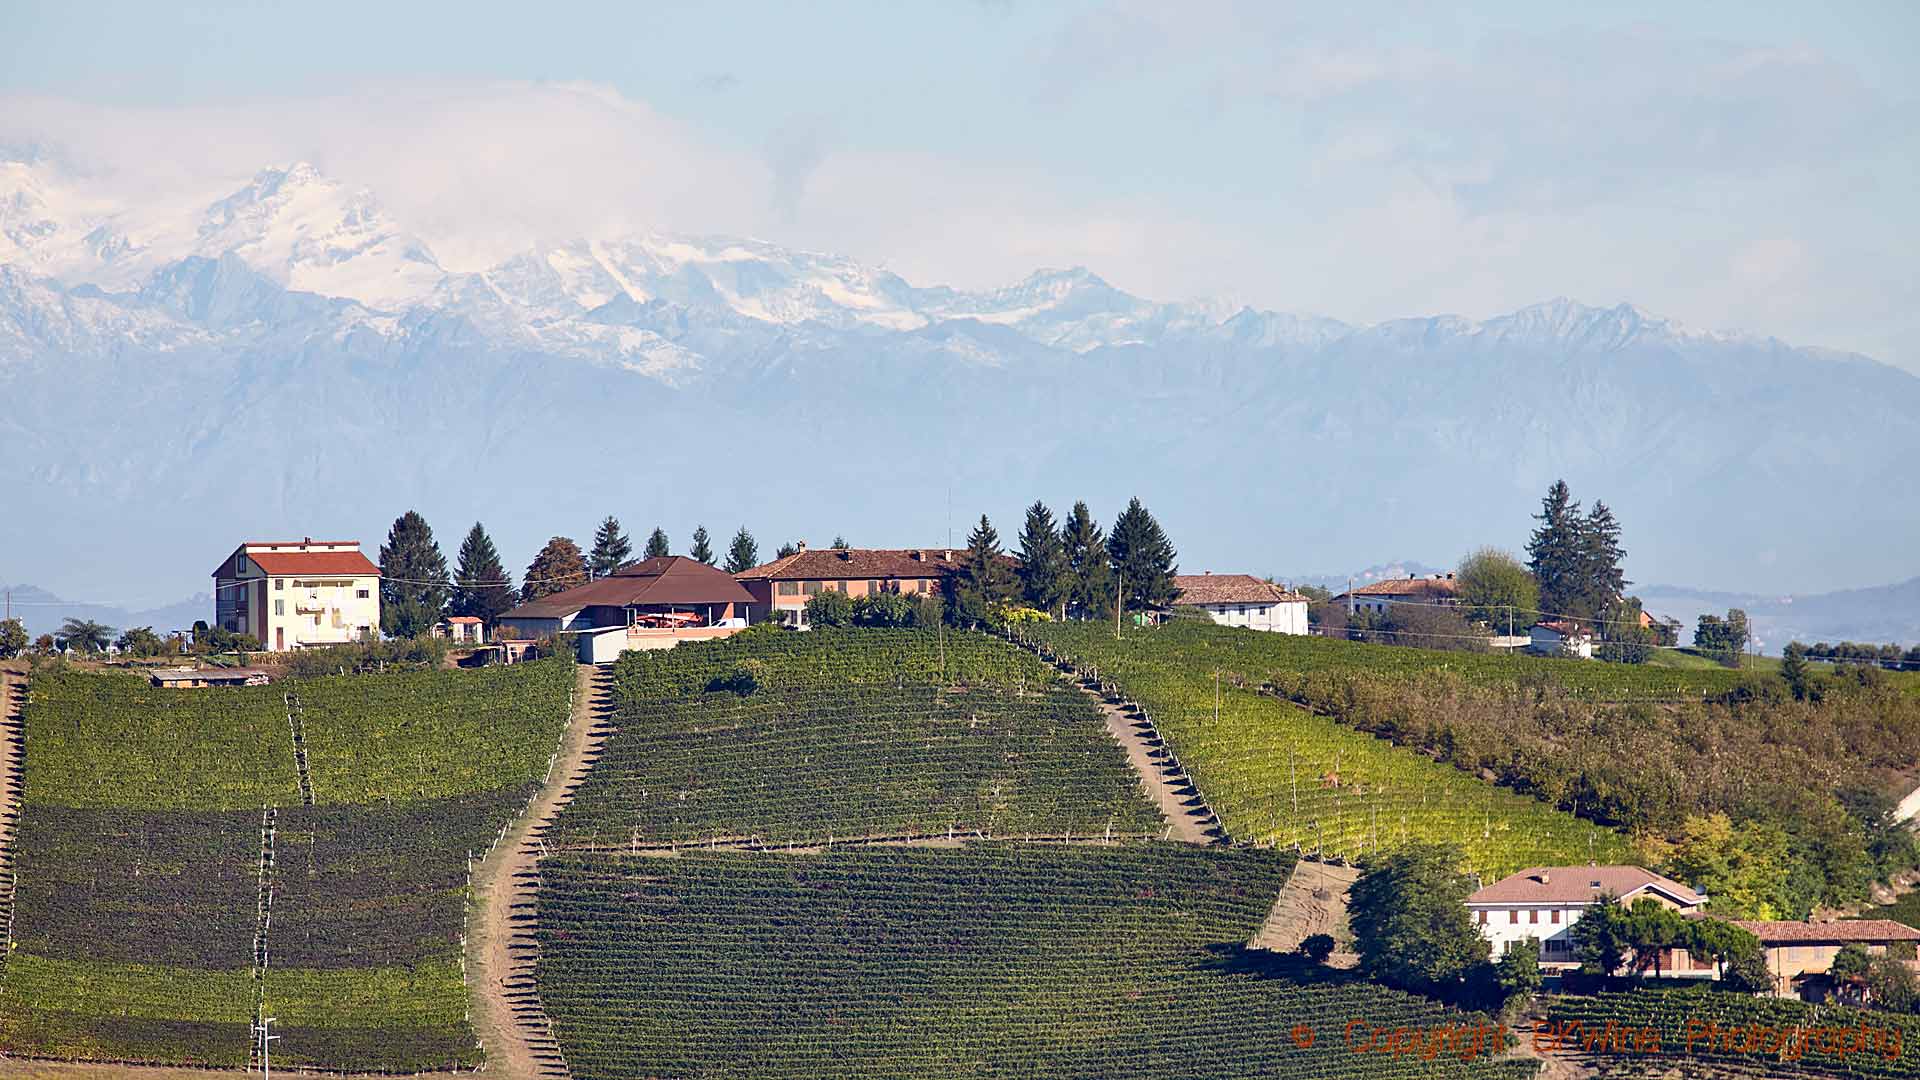 Vineyards, a village on a hilltop and snowy mountains in Piedmont